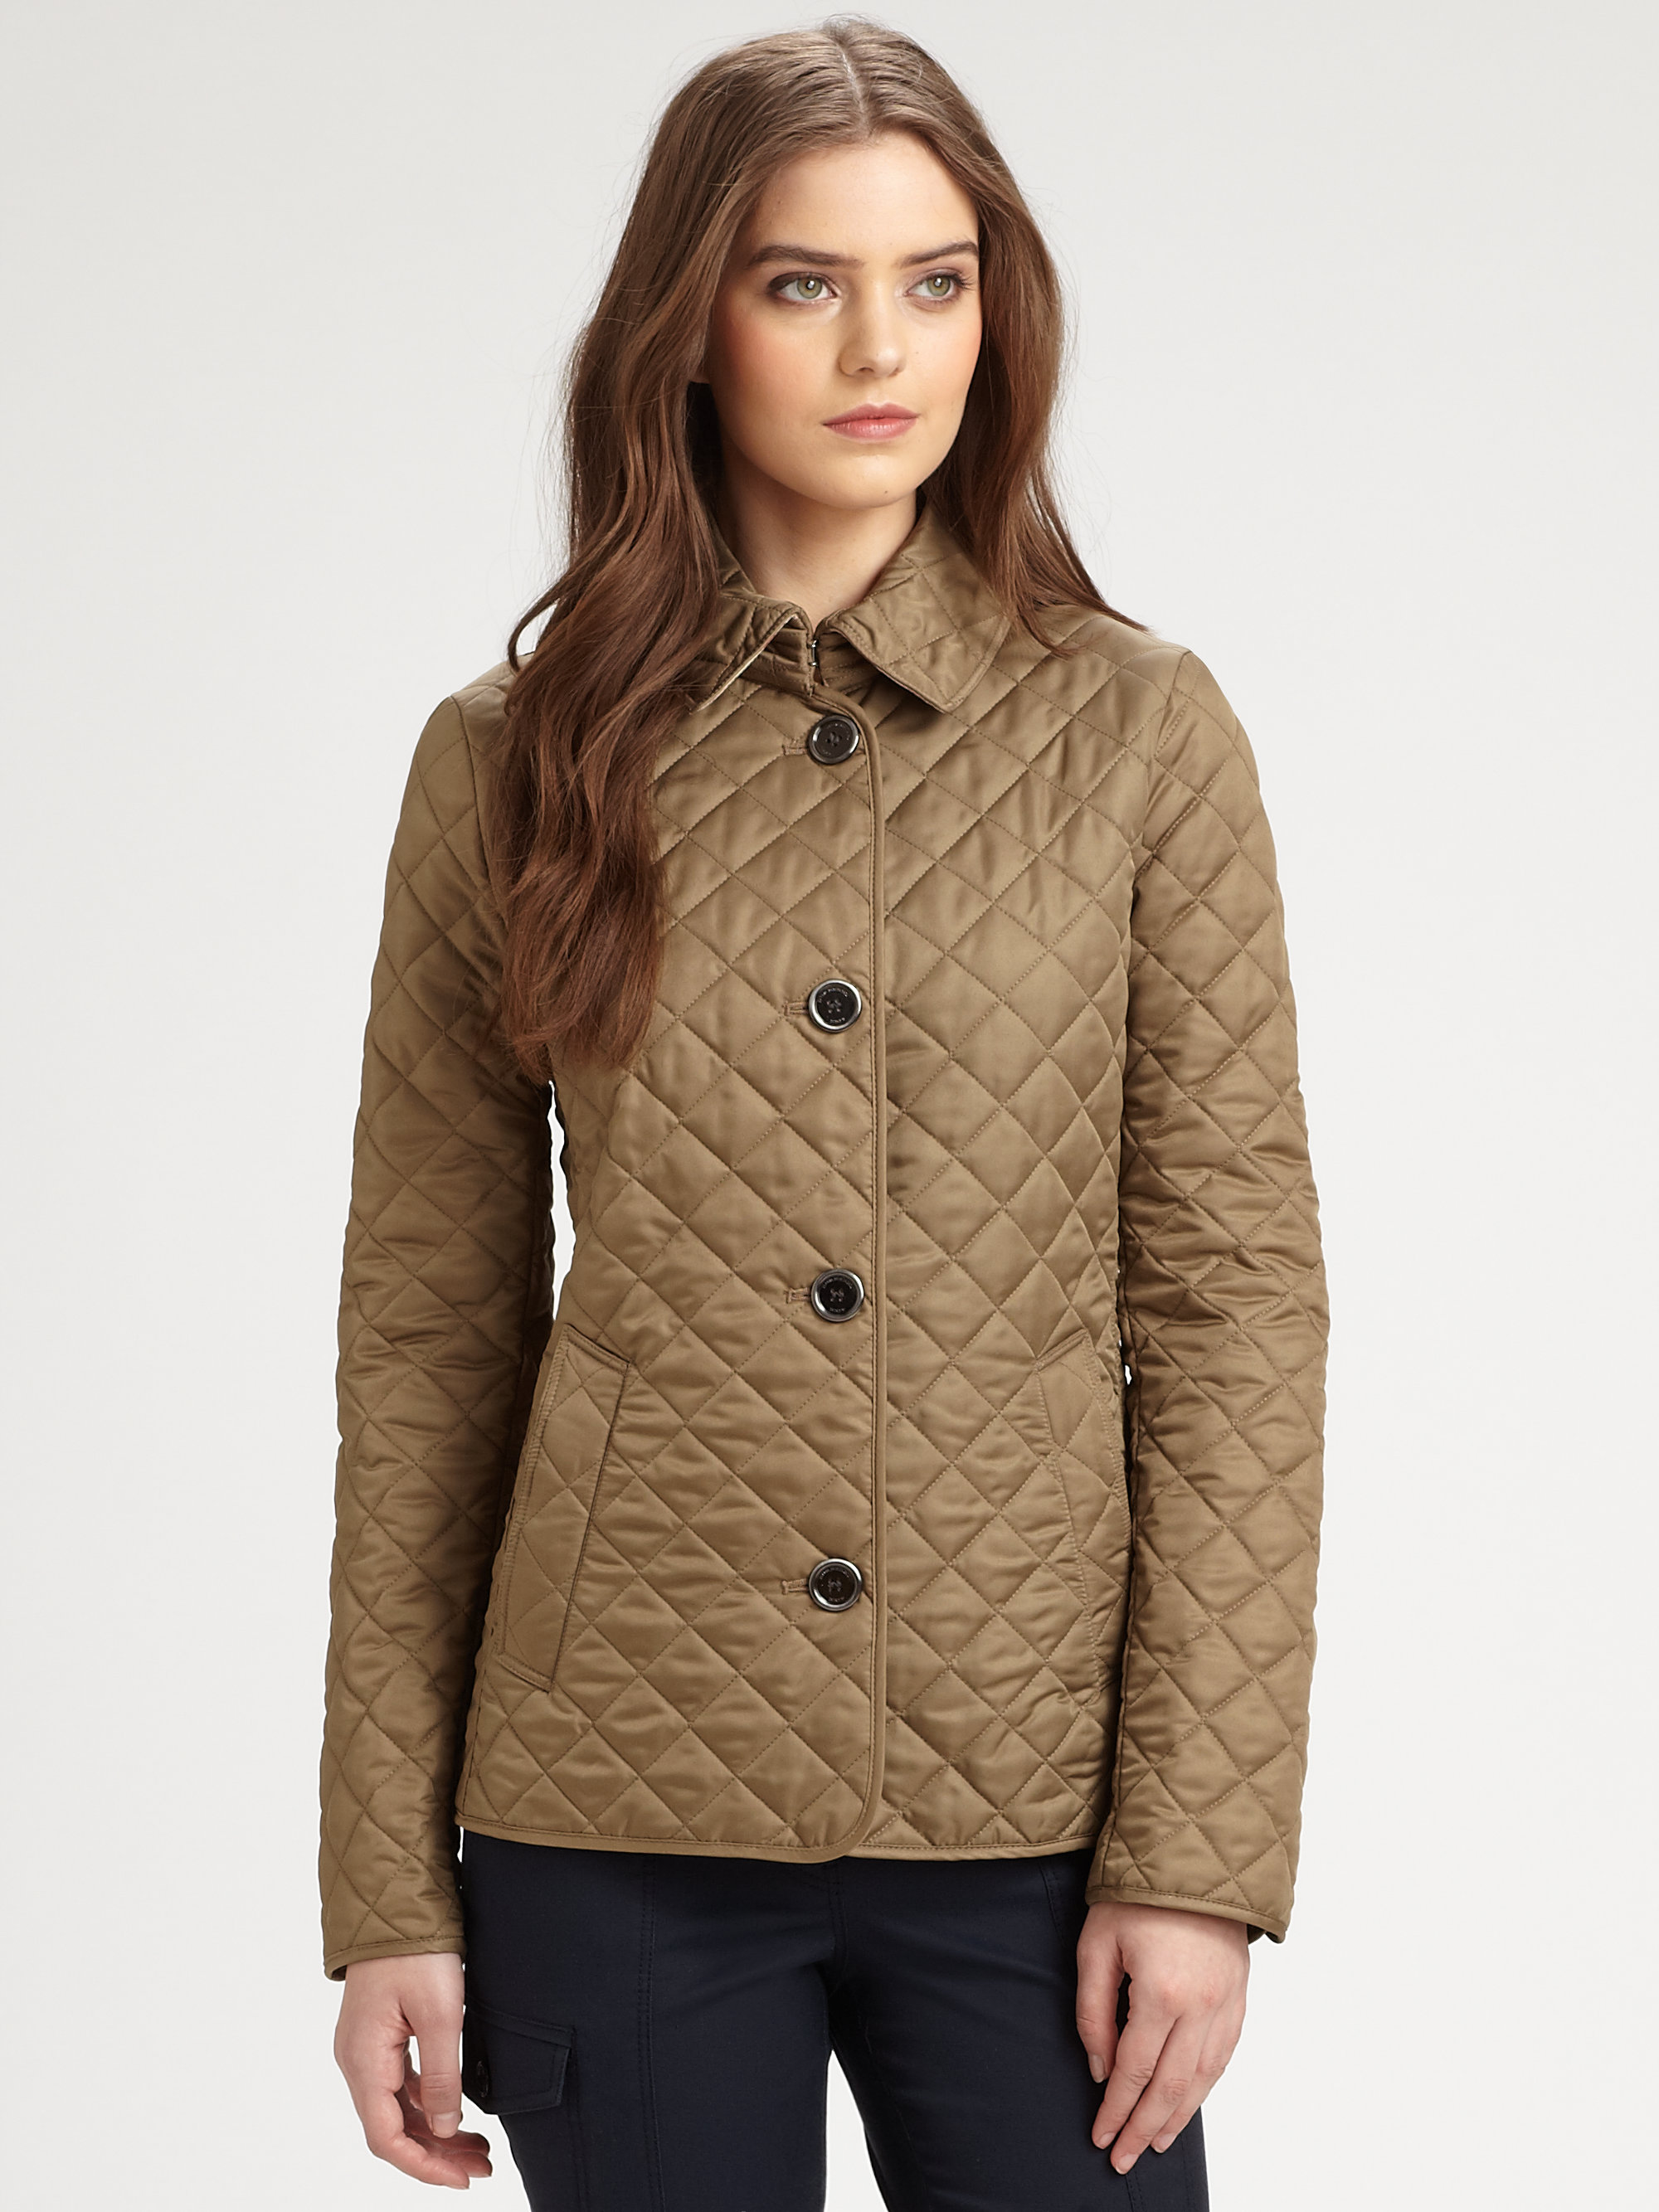 Burberry Brit Copford Quilted Jacket in Khaki (olive) | Lyst